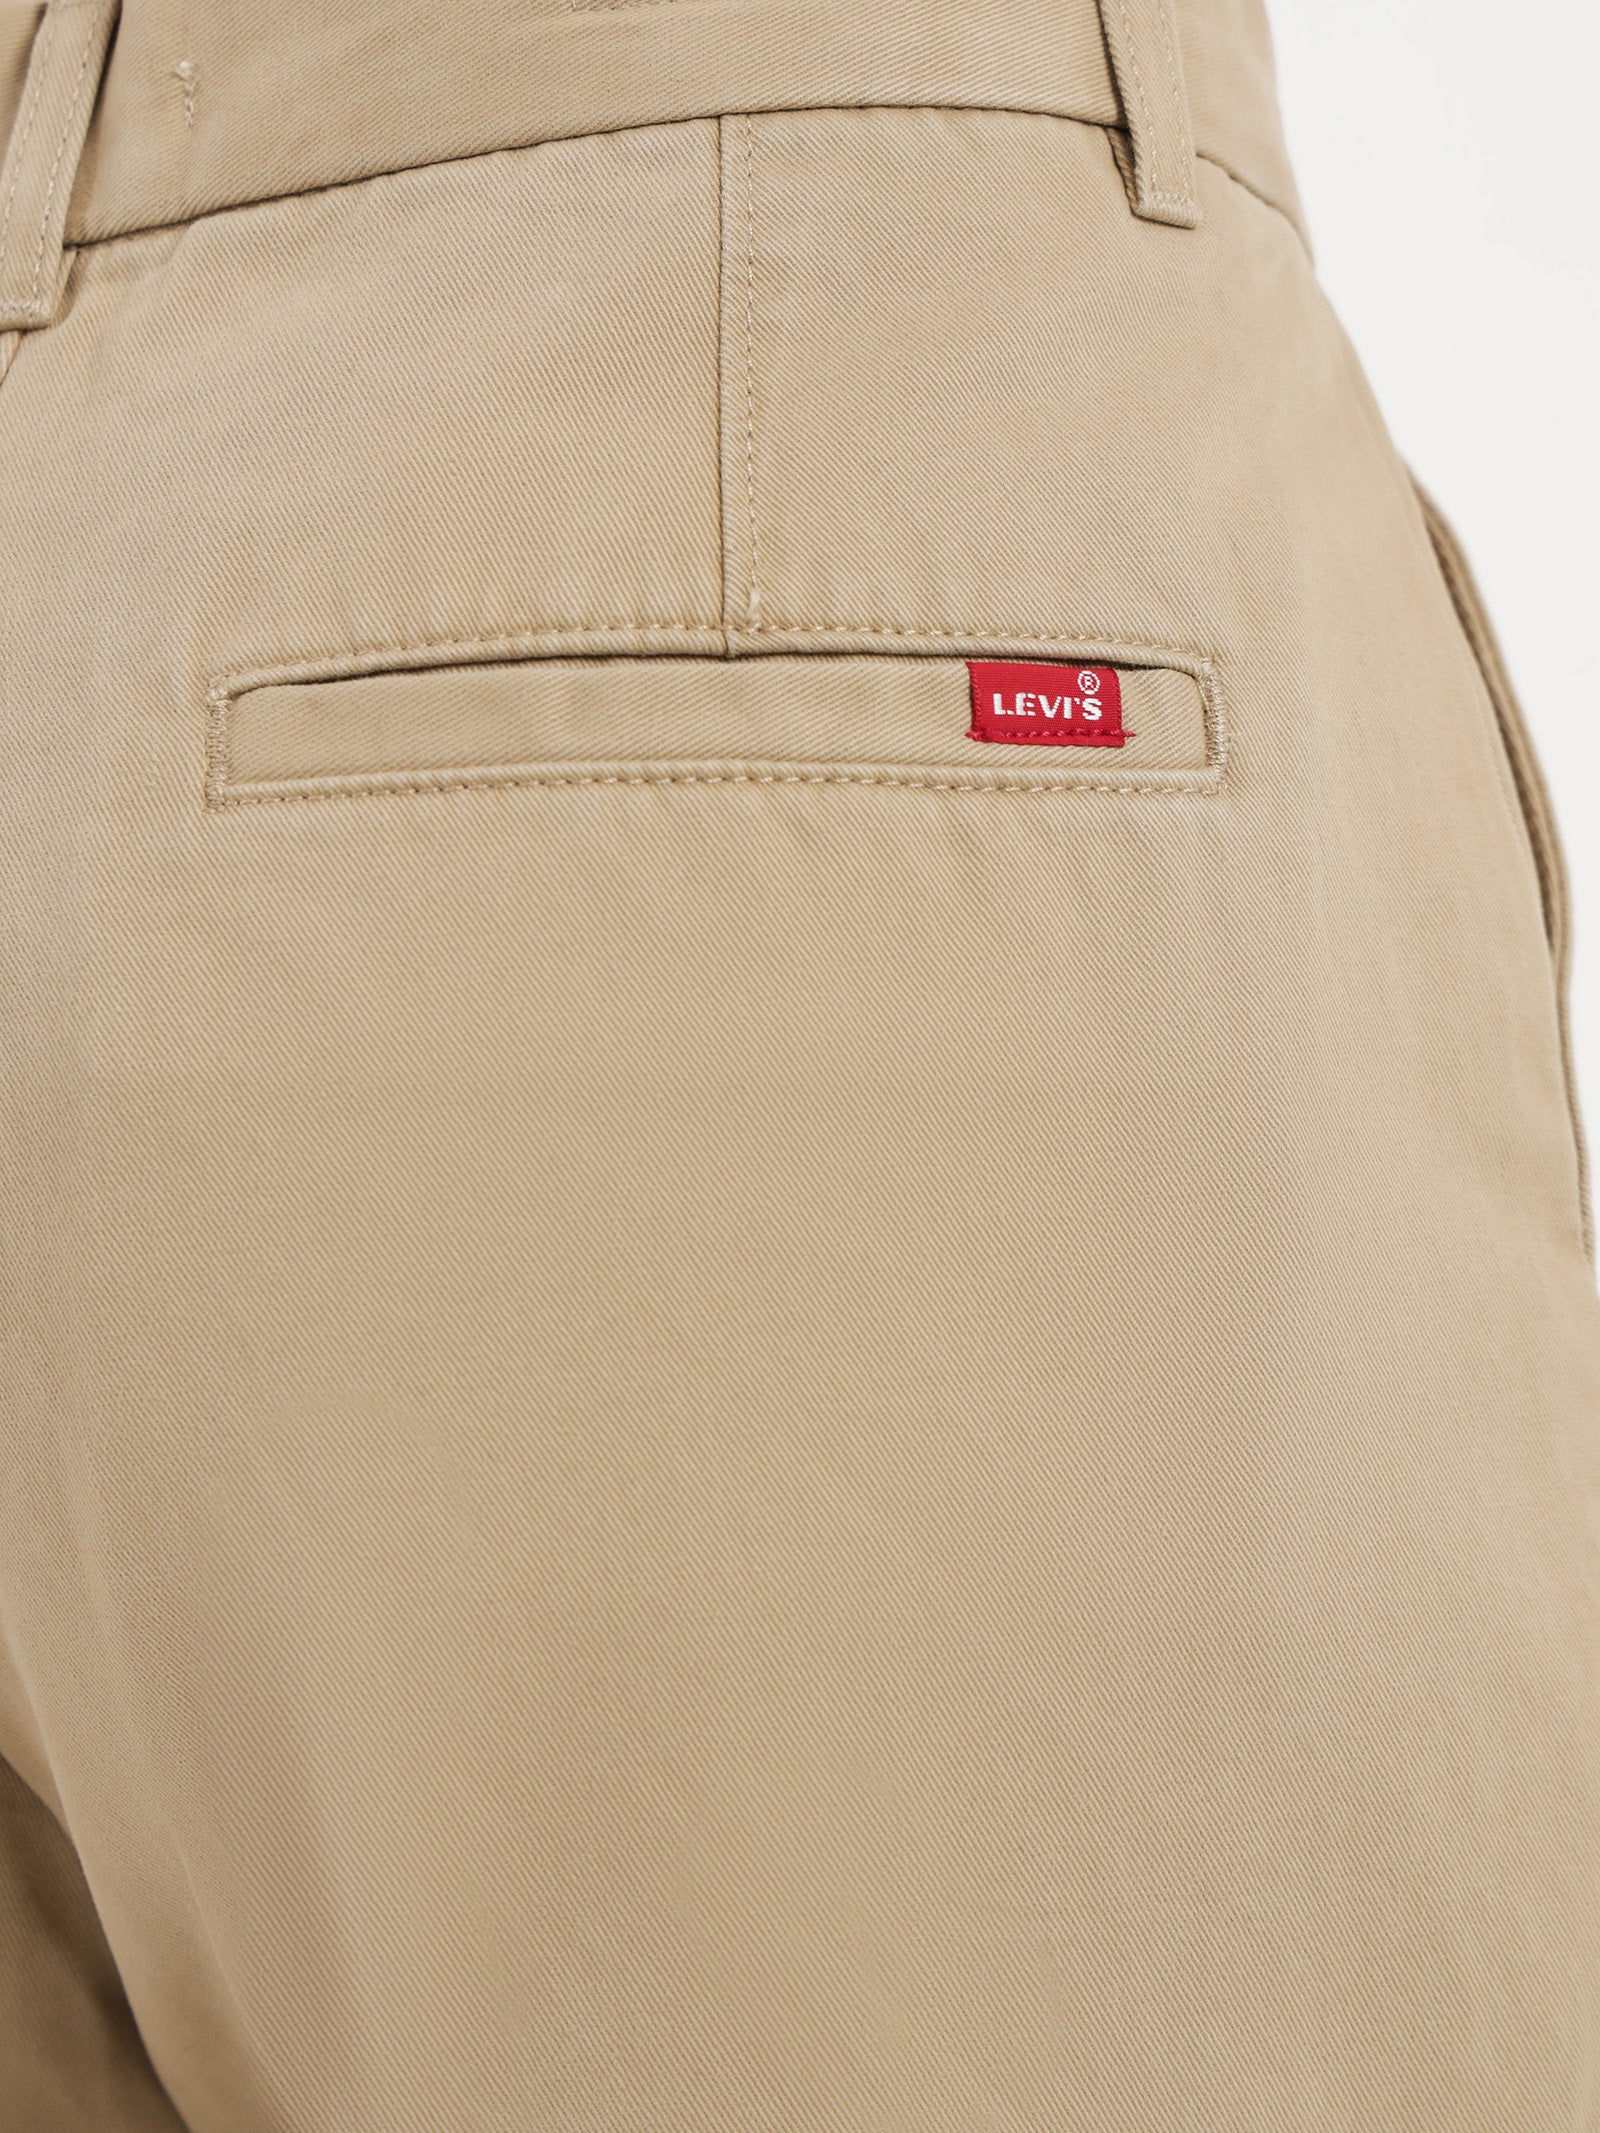 Levis XX Chino Jogger III Tapered Pants  Harvest Gold